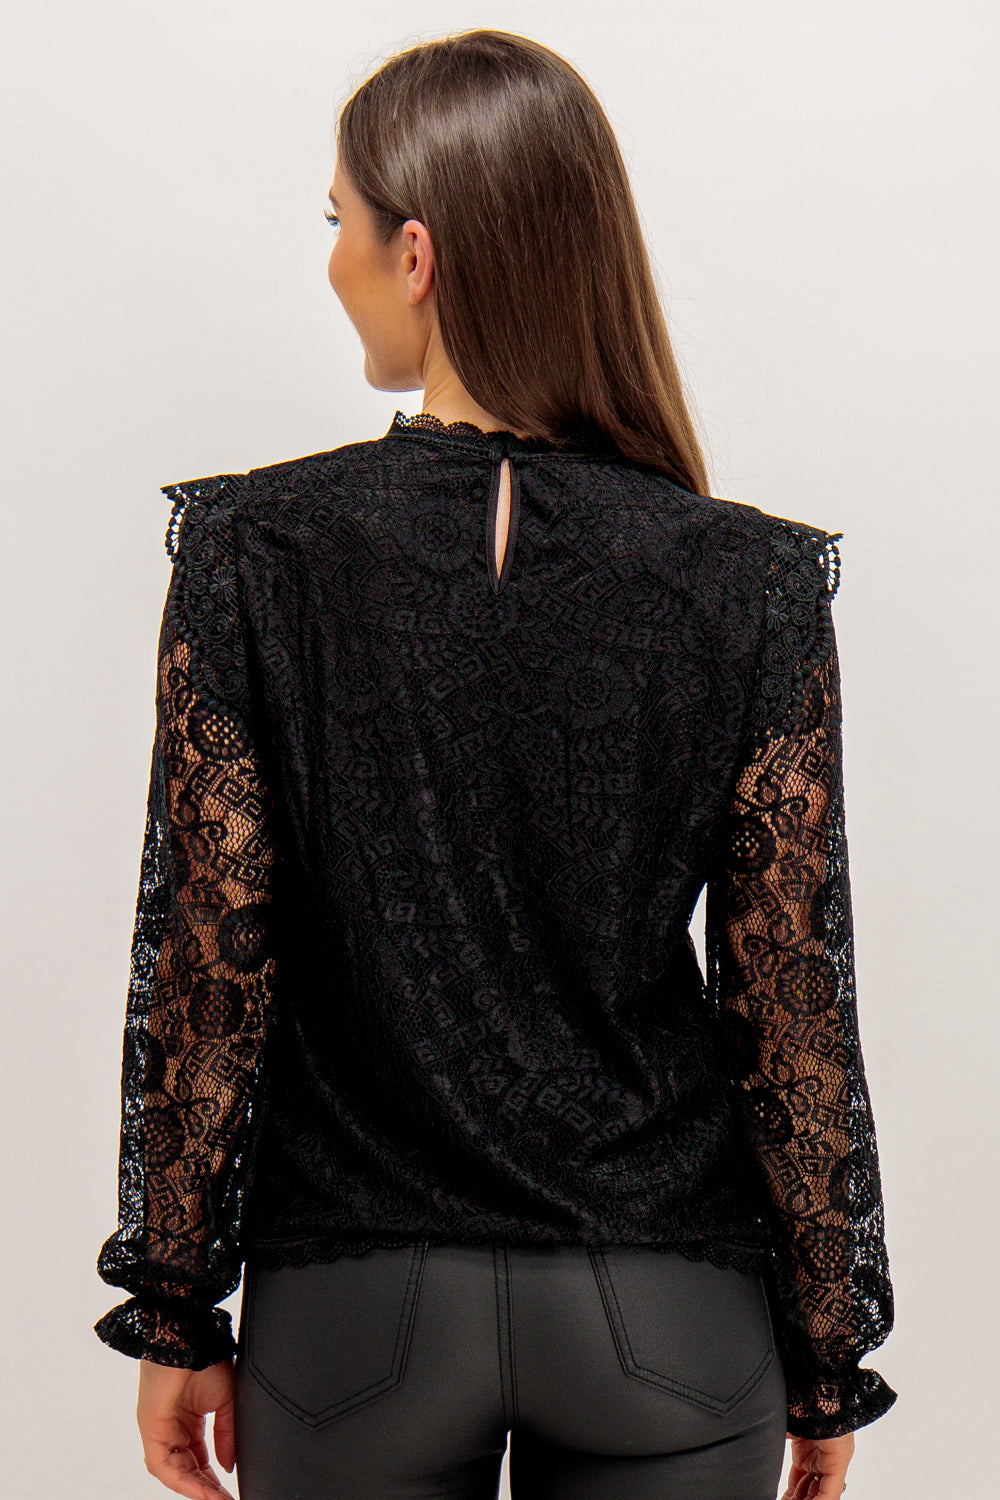  Black Lace Long Sleeve Top